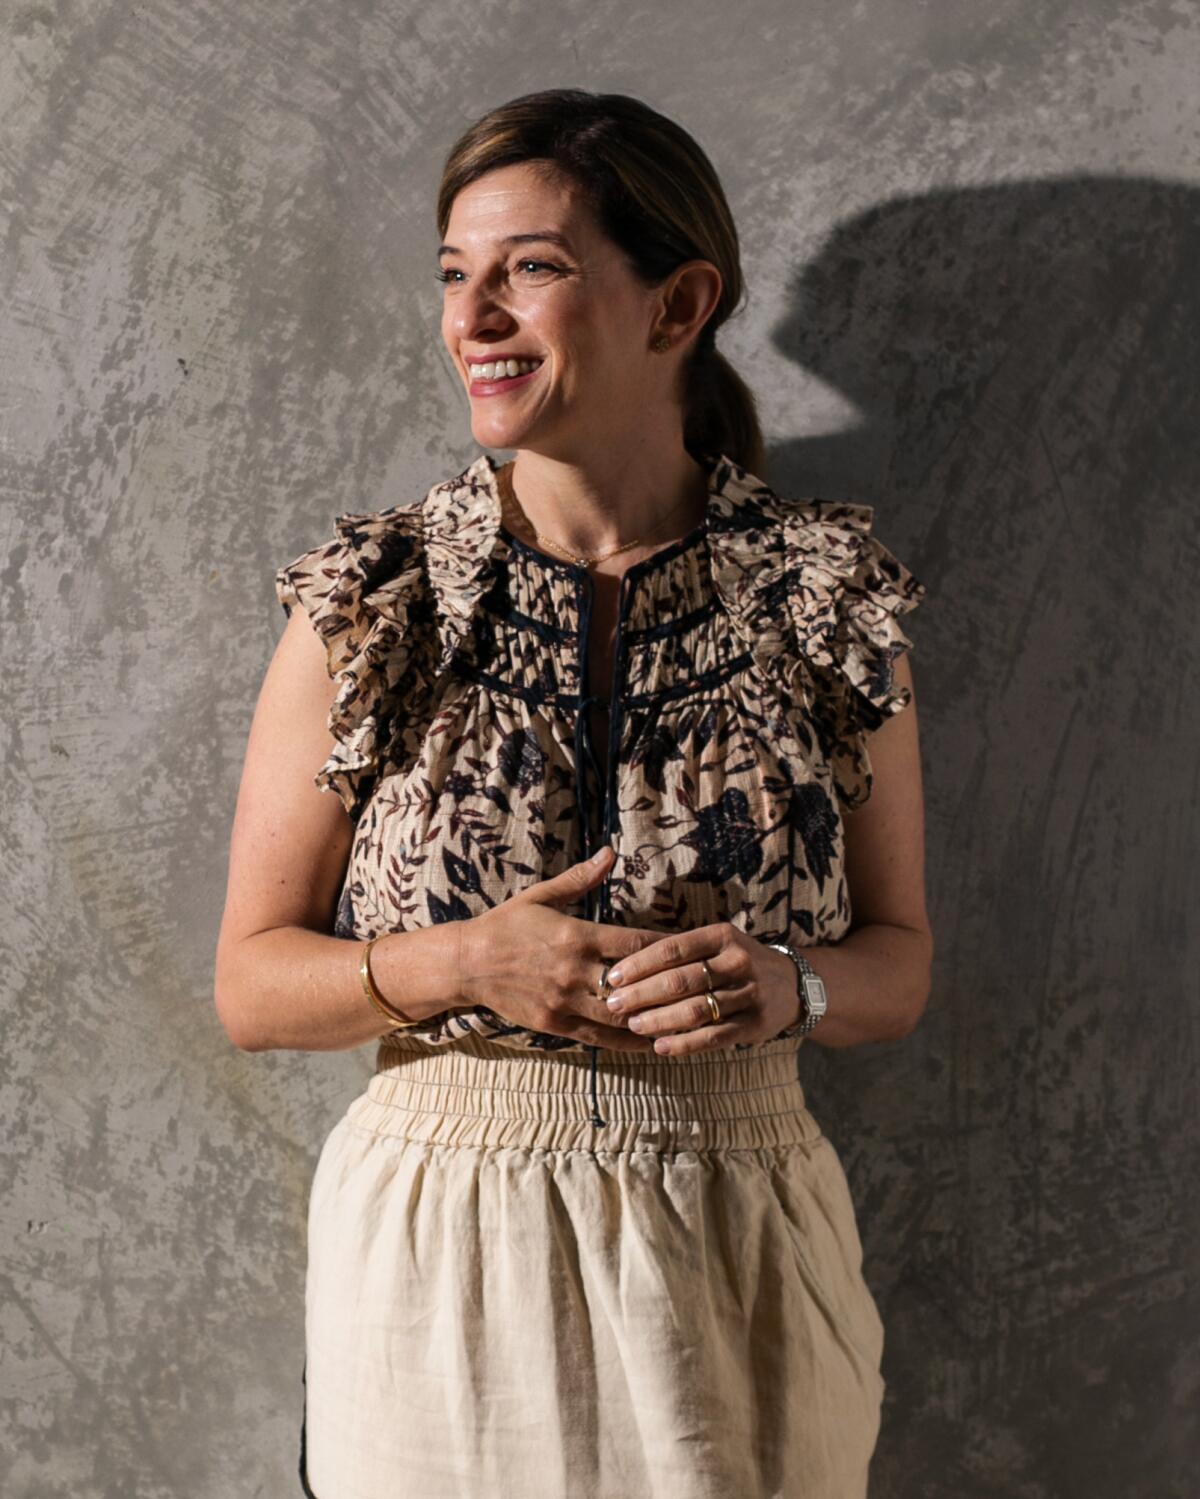 Chef Pati Jinich smiles in front of a gray wall.  